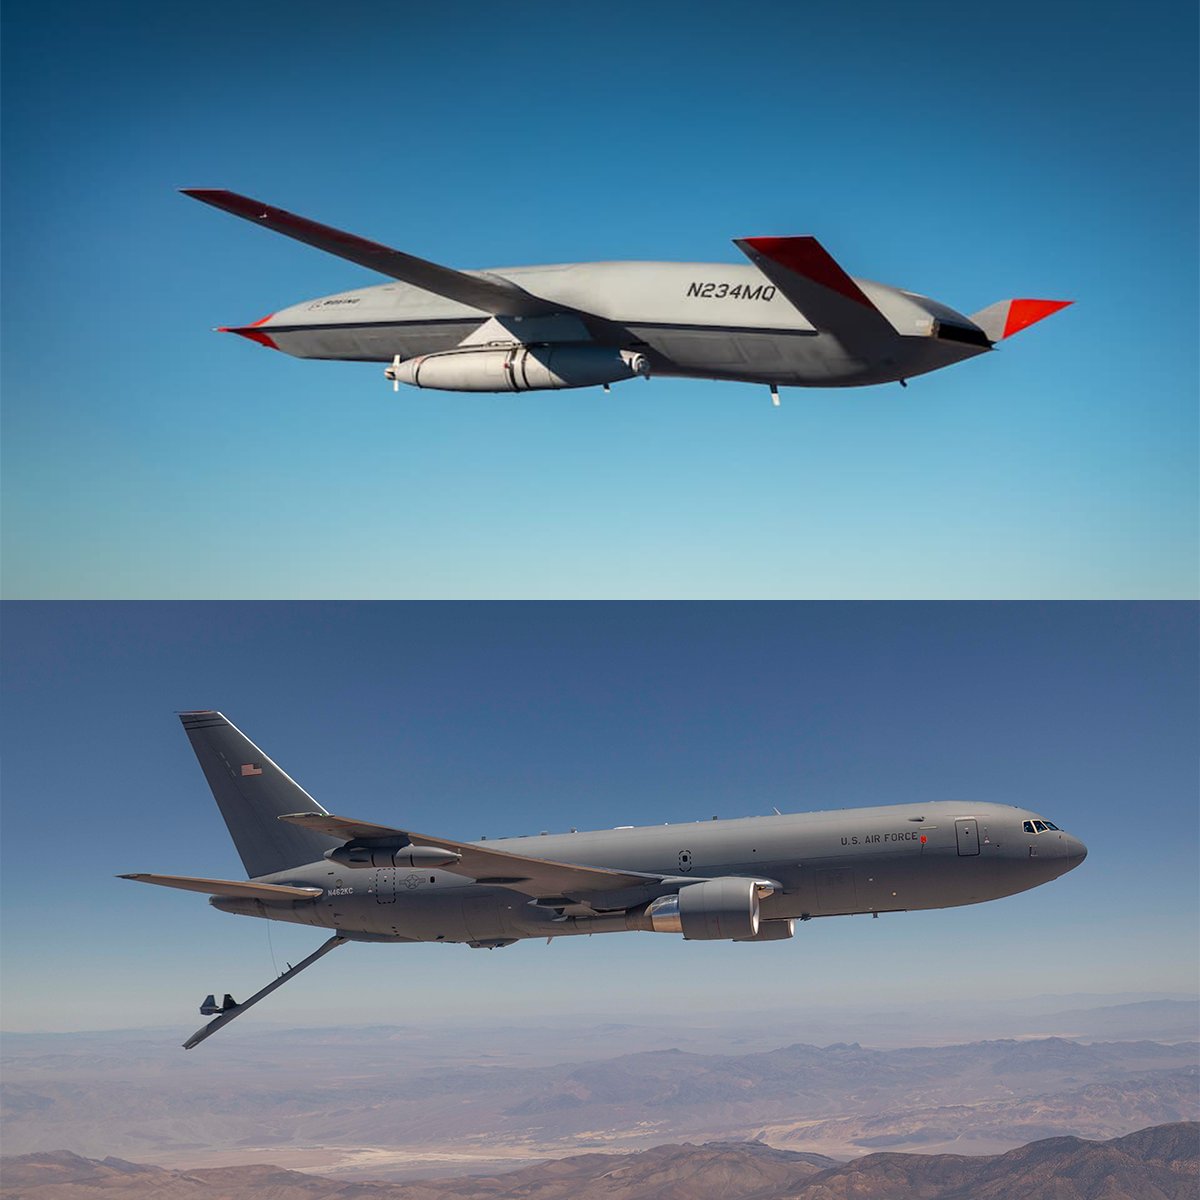 This is what the future of aerial refueling looks like.

The #MQ25 Stingray and #KC46 Pegasus demonstrate next-generation aerial refueling capabilities that are transforming the role of the tanker.

Learn more: goboeing.co/46TFLtx

#IYKYK